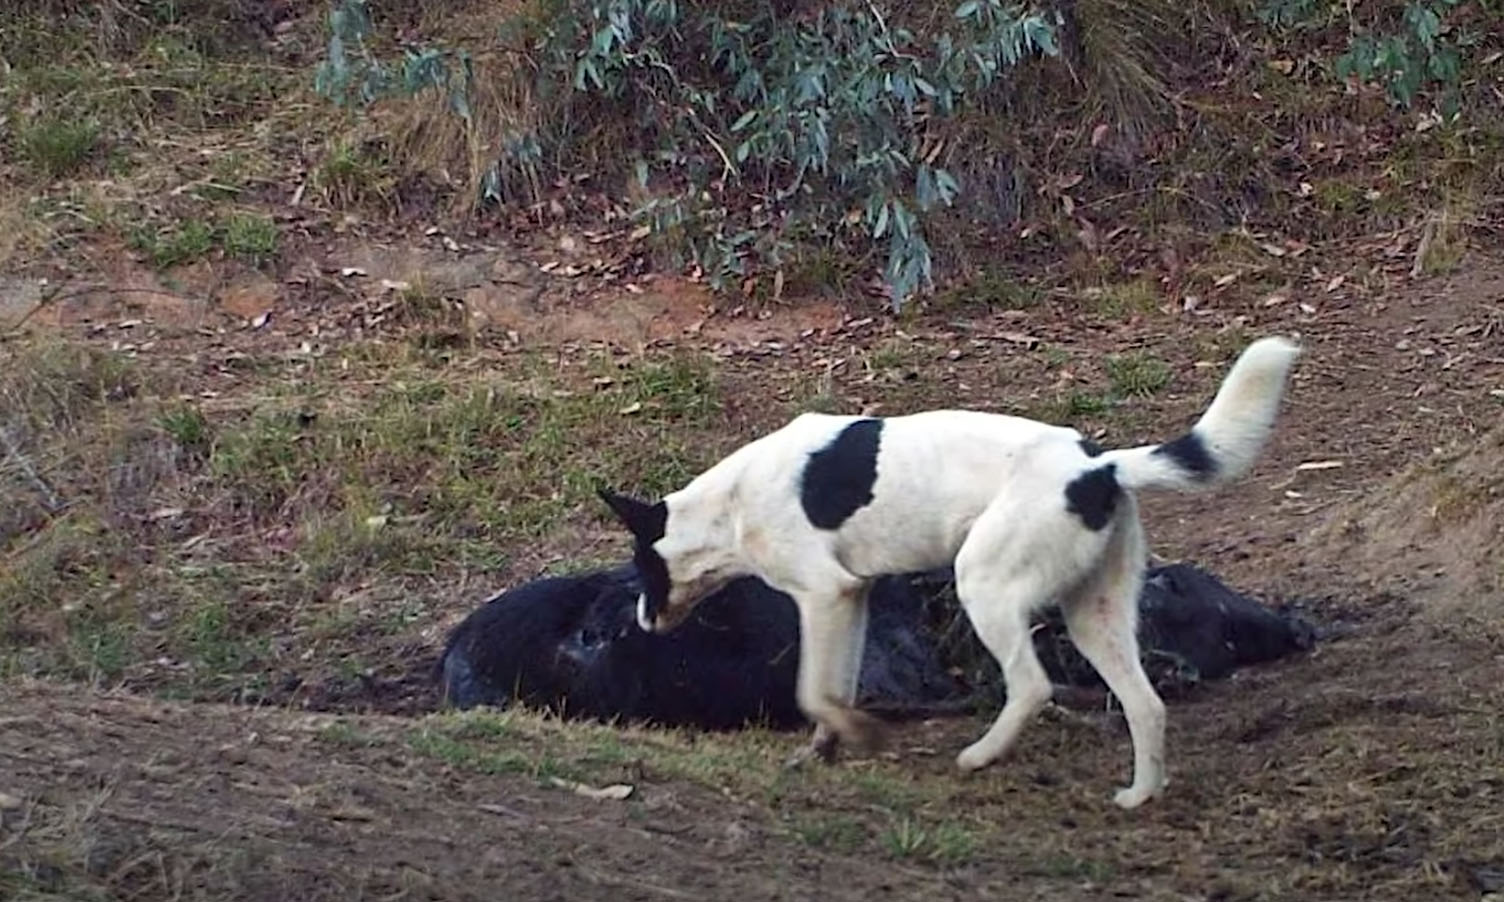 A wild dog next to the body of a cow